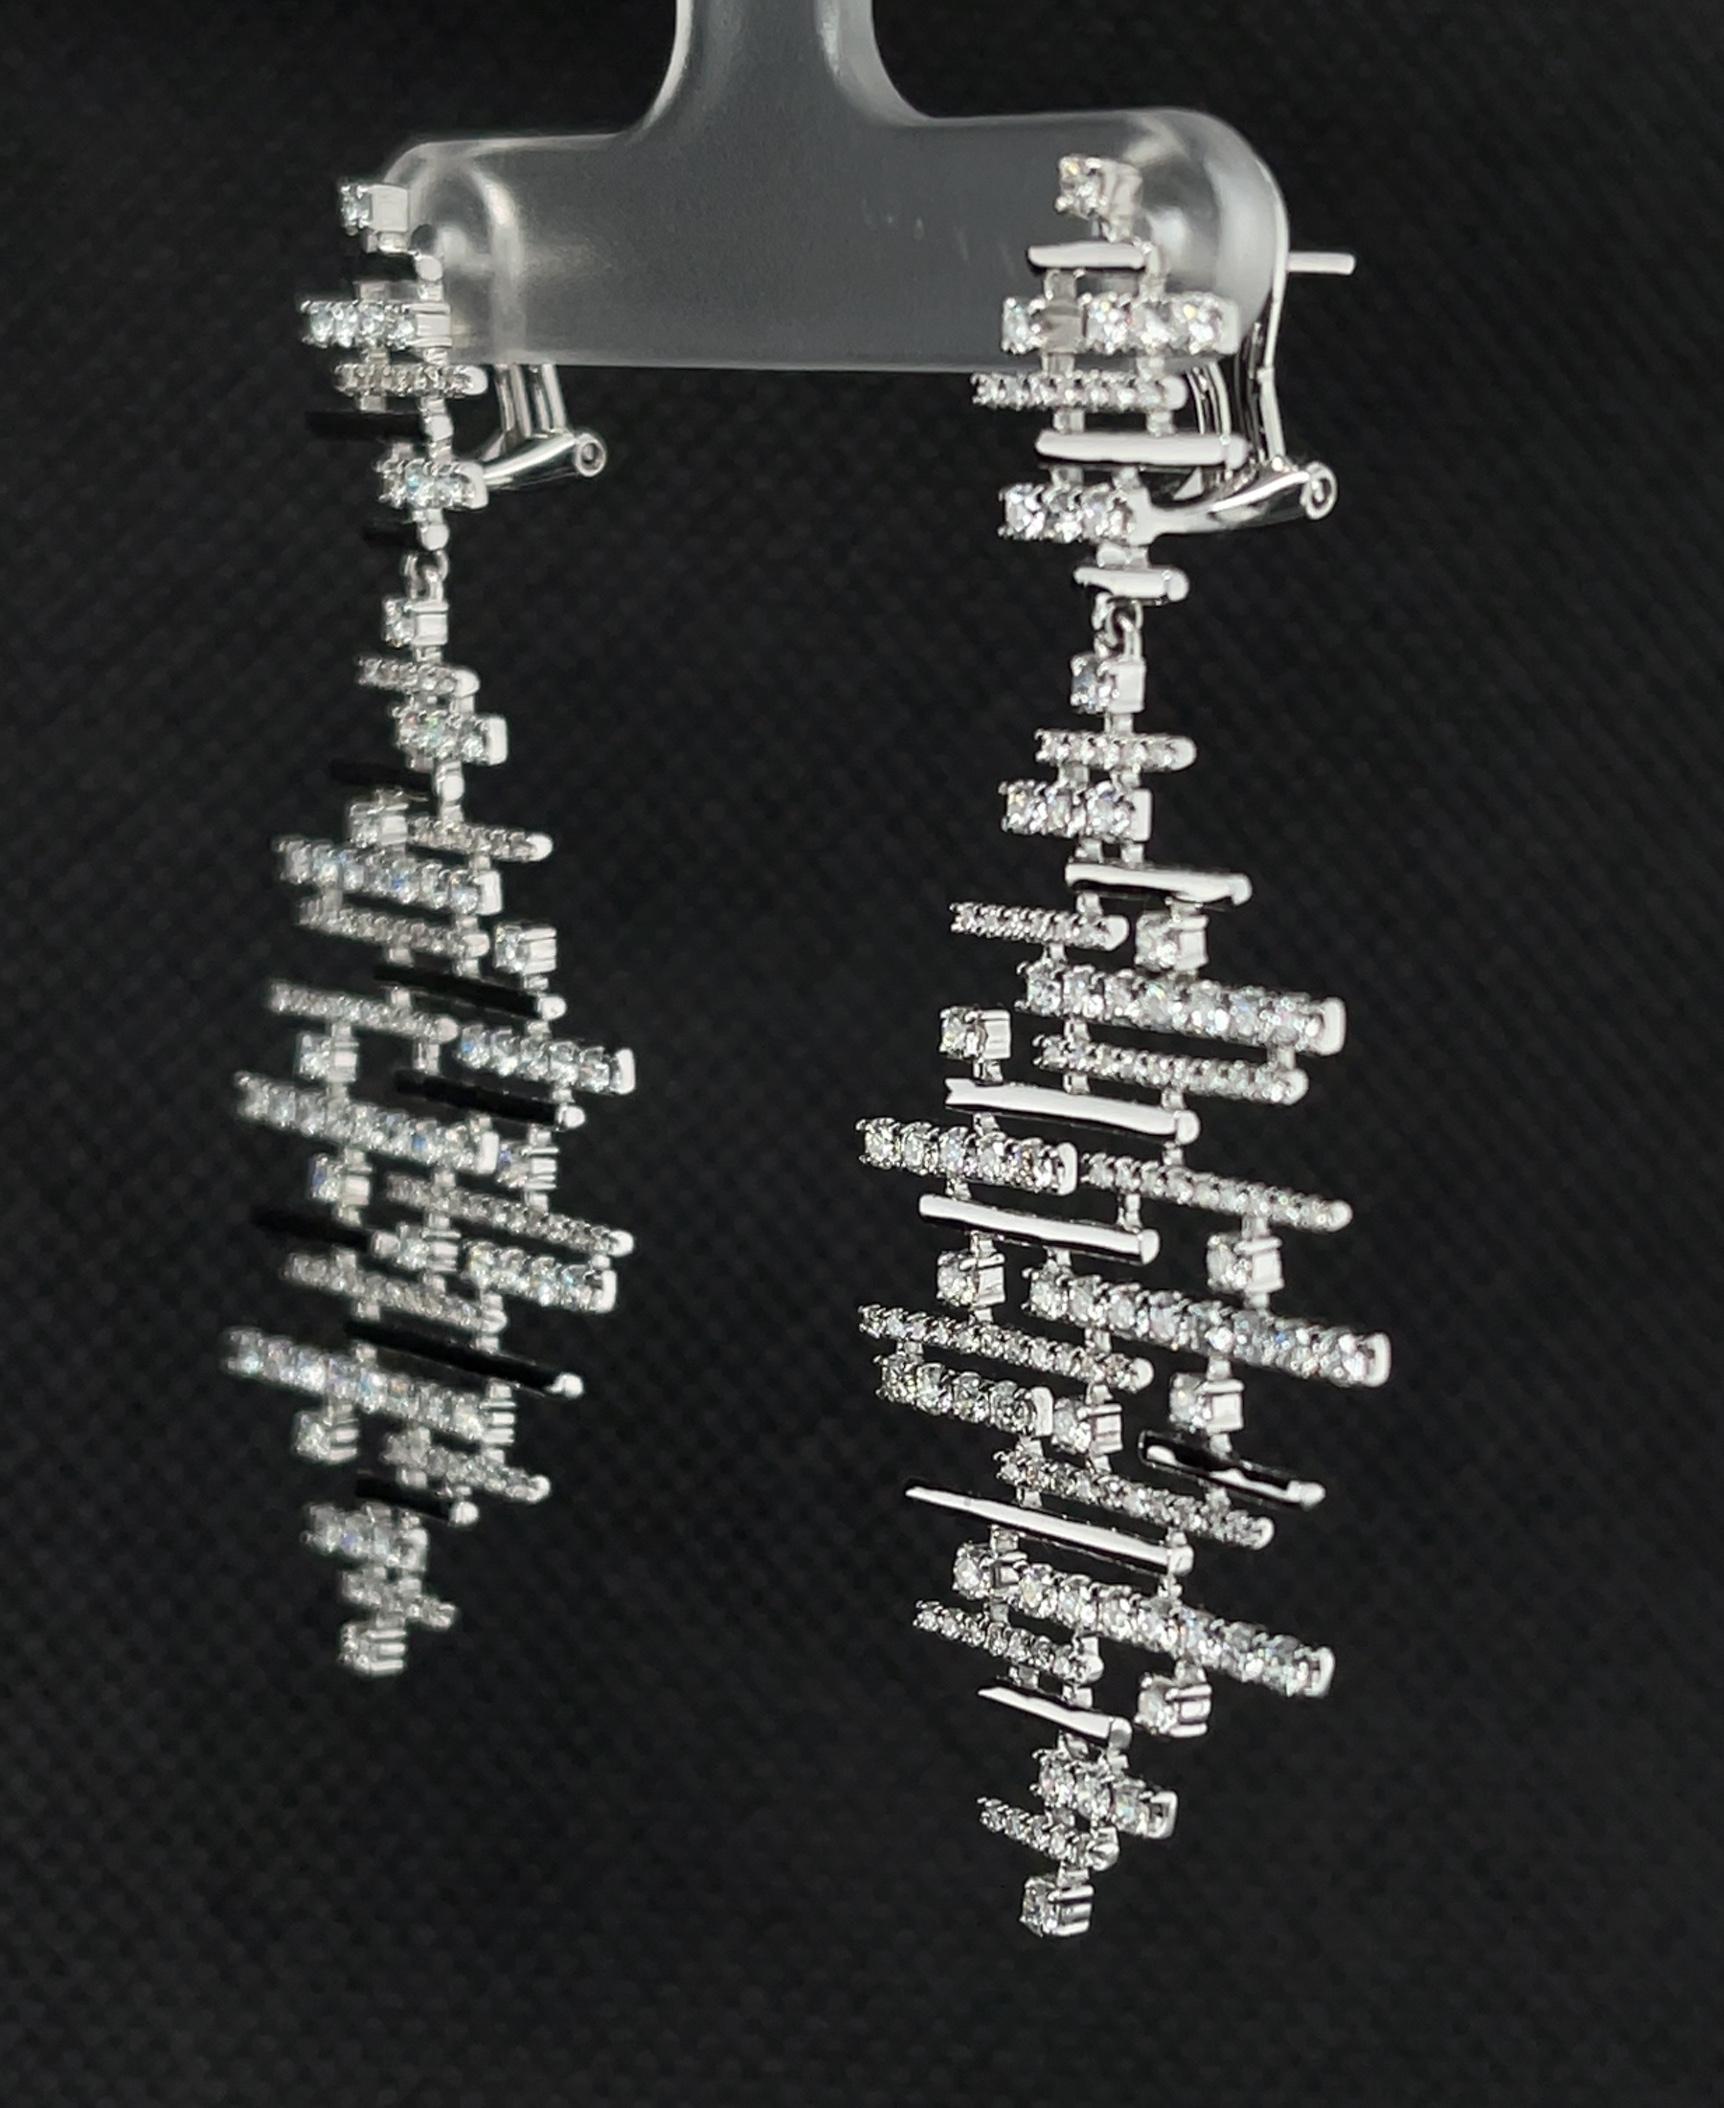 Artisan Diamond Chandelier French Clip Dangle Earrings in White Gold, 2.35 Carats Total